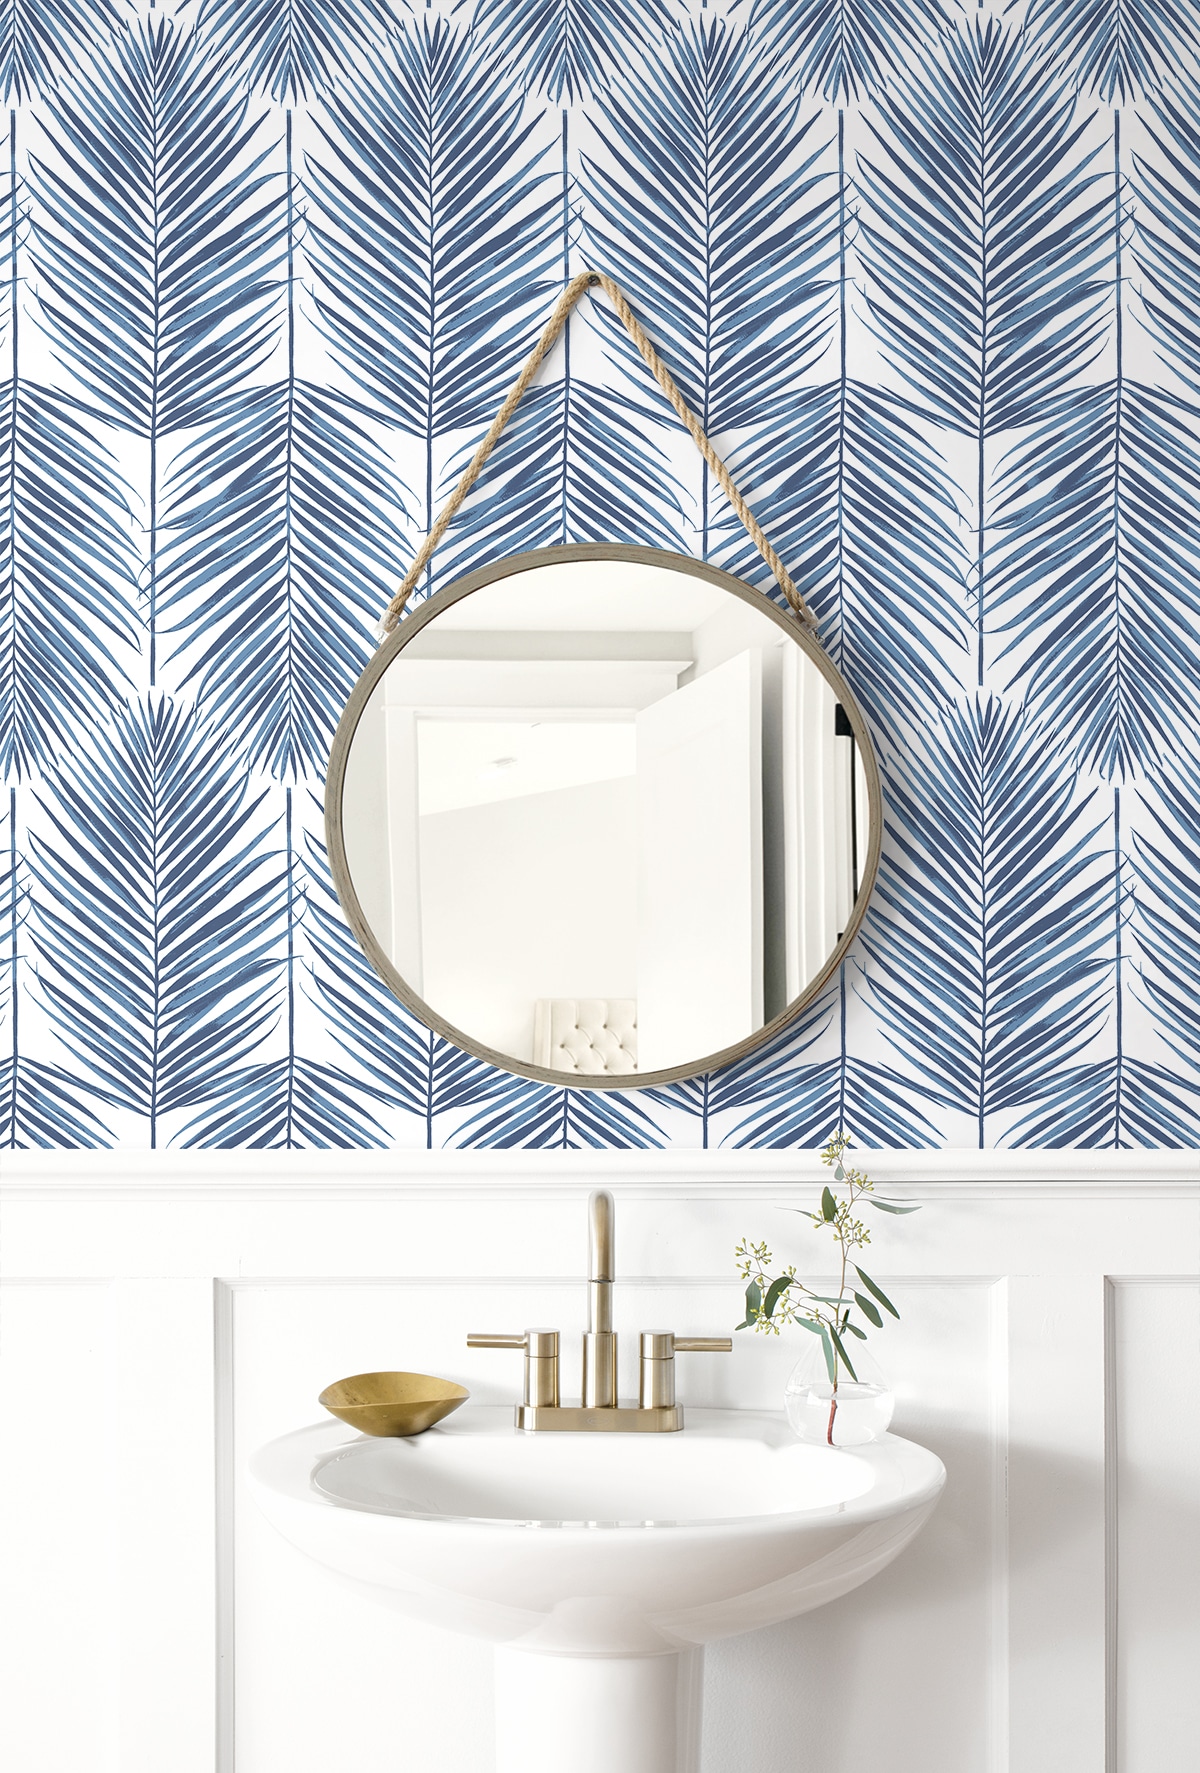 NextWall 3075sq ft Coastal Blue Vinyl IvyVines Selfadhesive Peel and  Stick Wallpaper in the Wallpaper department at Lowescom